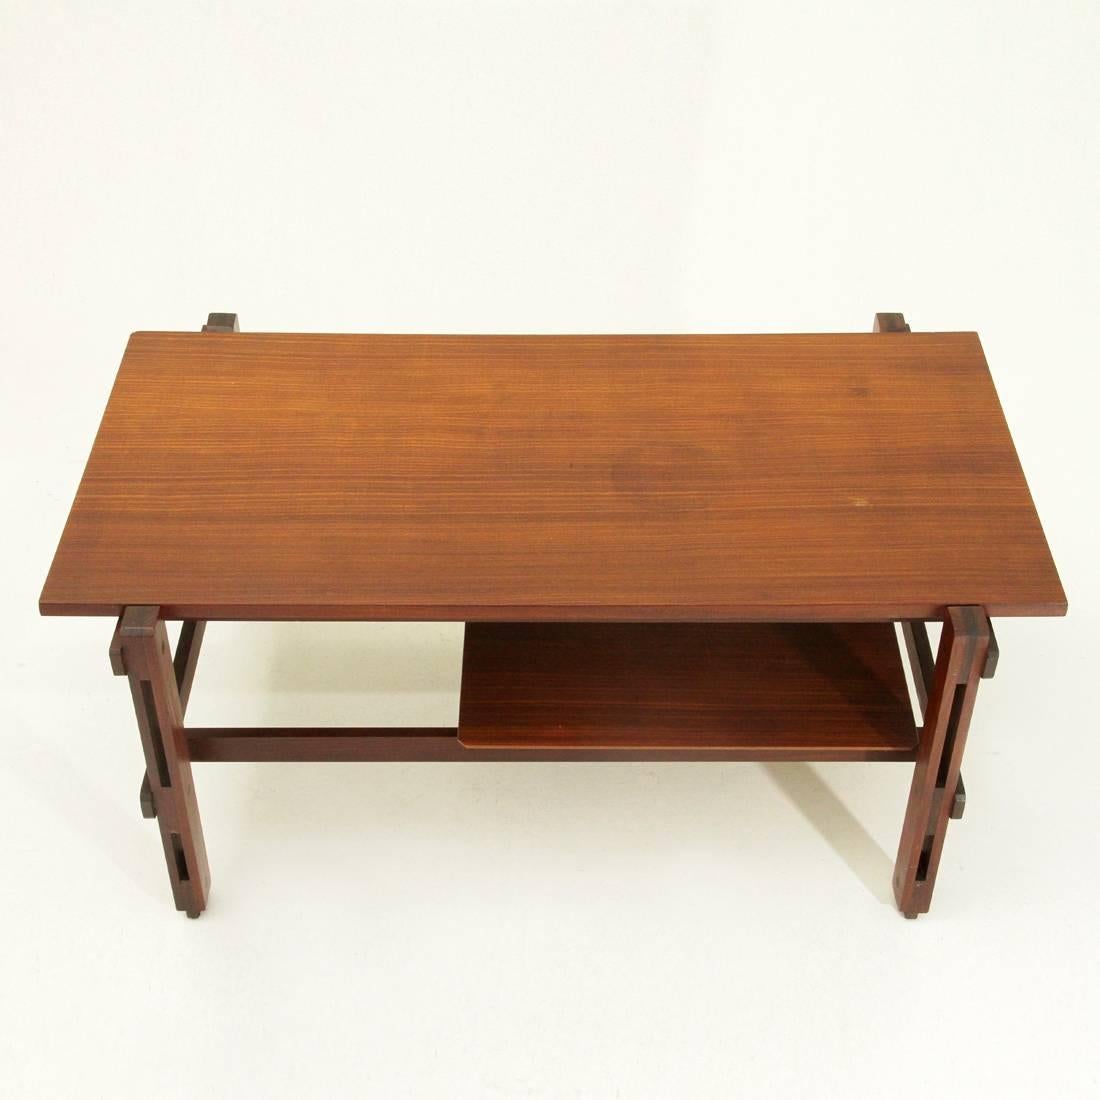 Italian coffee table from the 60s.
Legs and tops in teak veneered wood.
Lower floor with edge cut at 45 °.
Brass hardware.
Structure in good condition, upper floor with some halos, some signs due to normal use over time.

Dimensions: Width 90 cm -